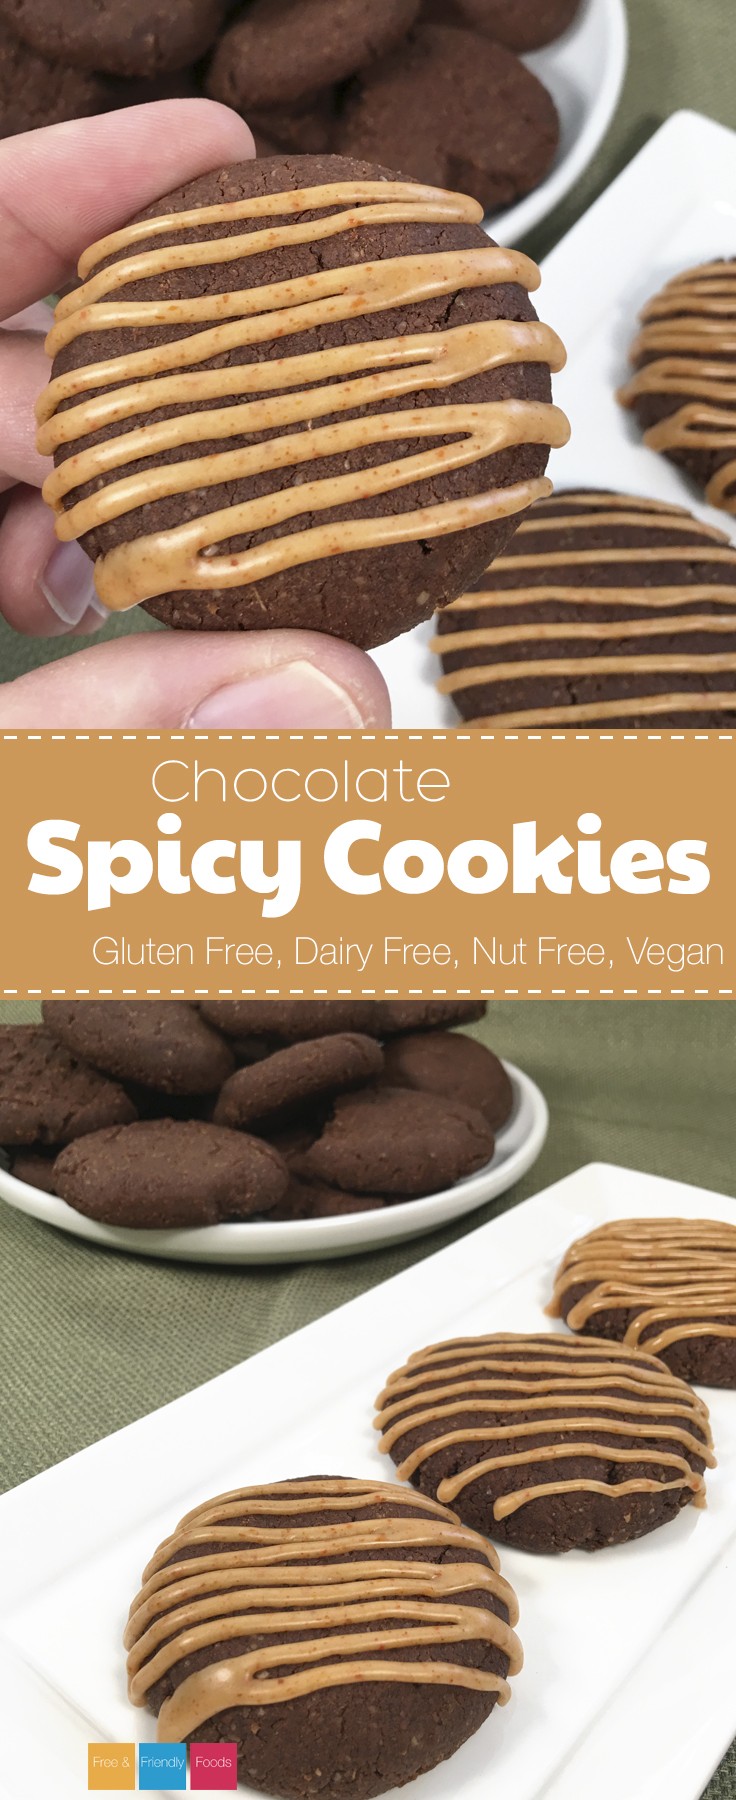 Spicy Chocolate Cookies by The Allergy Chef, Gluten Free, Vegan, Top 8 Free